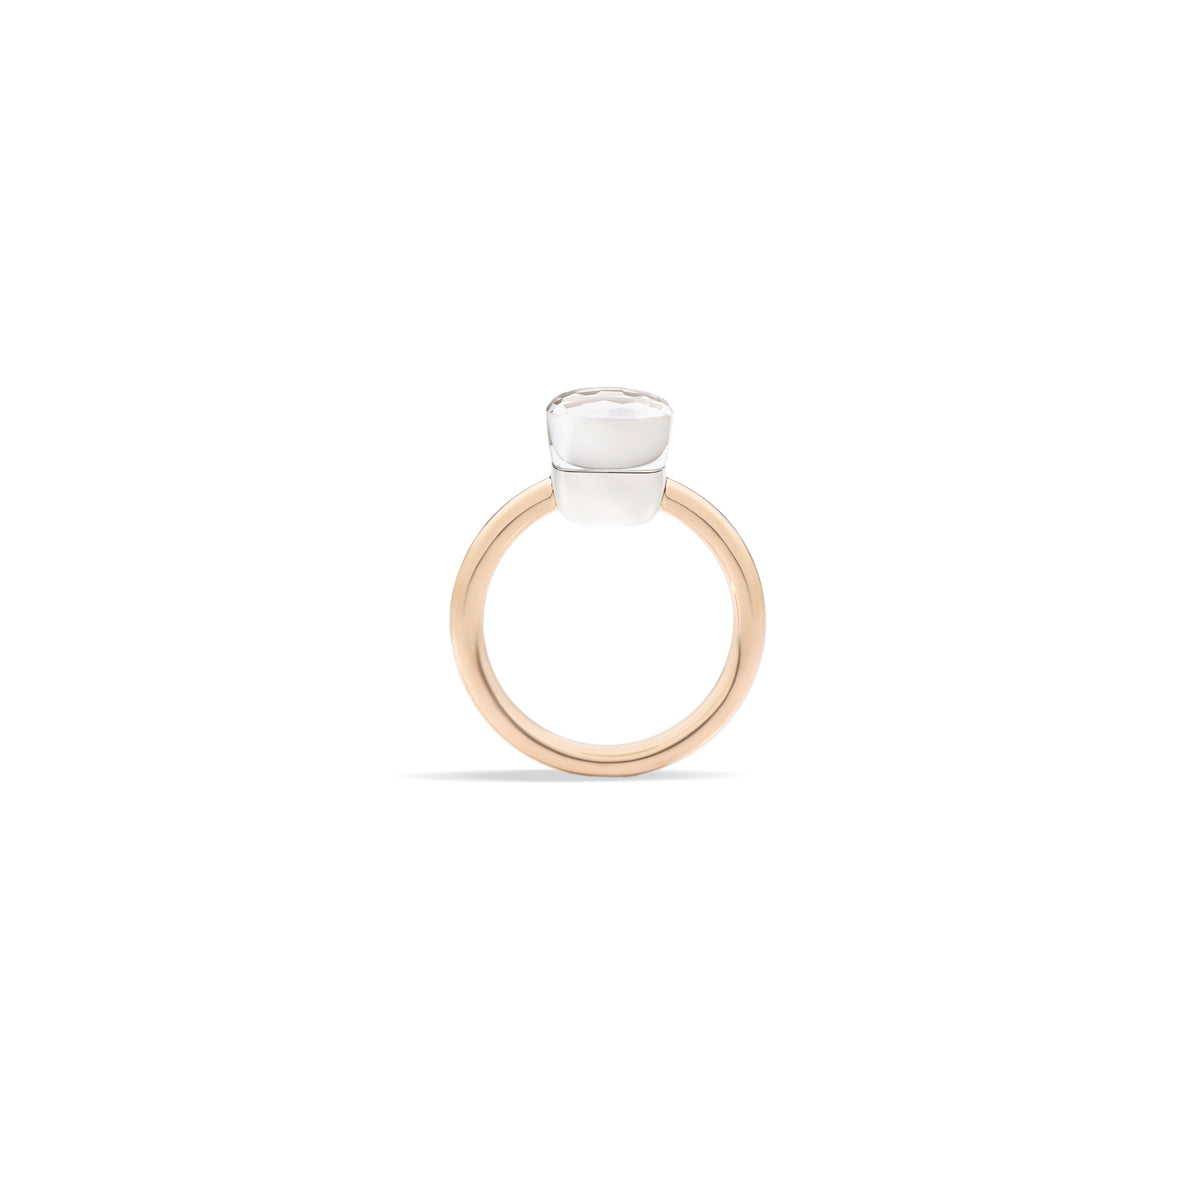 Nudo Petit Ring in 18k Rose Gold and White Gold with White Topaz - Orsini Jewellers NZ